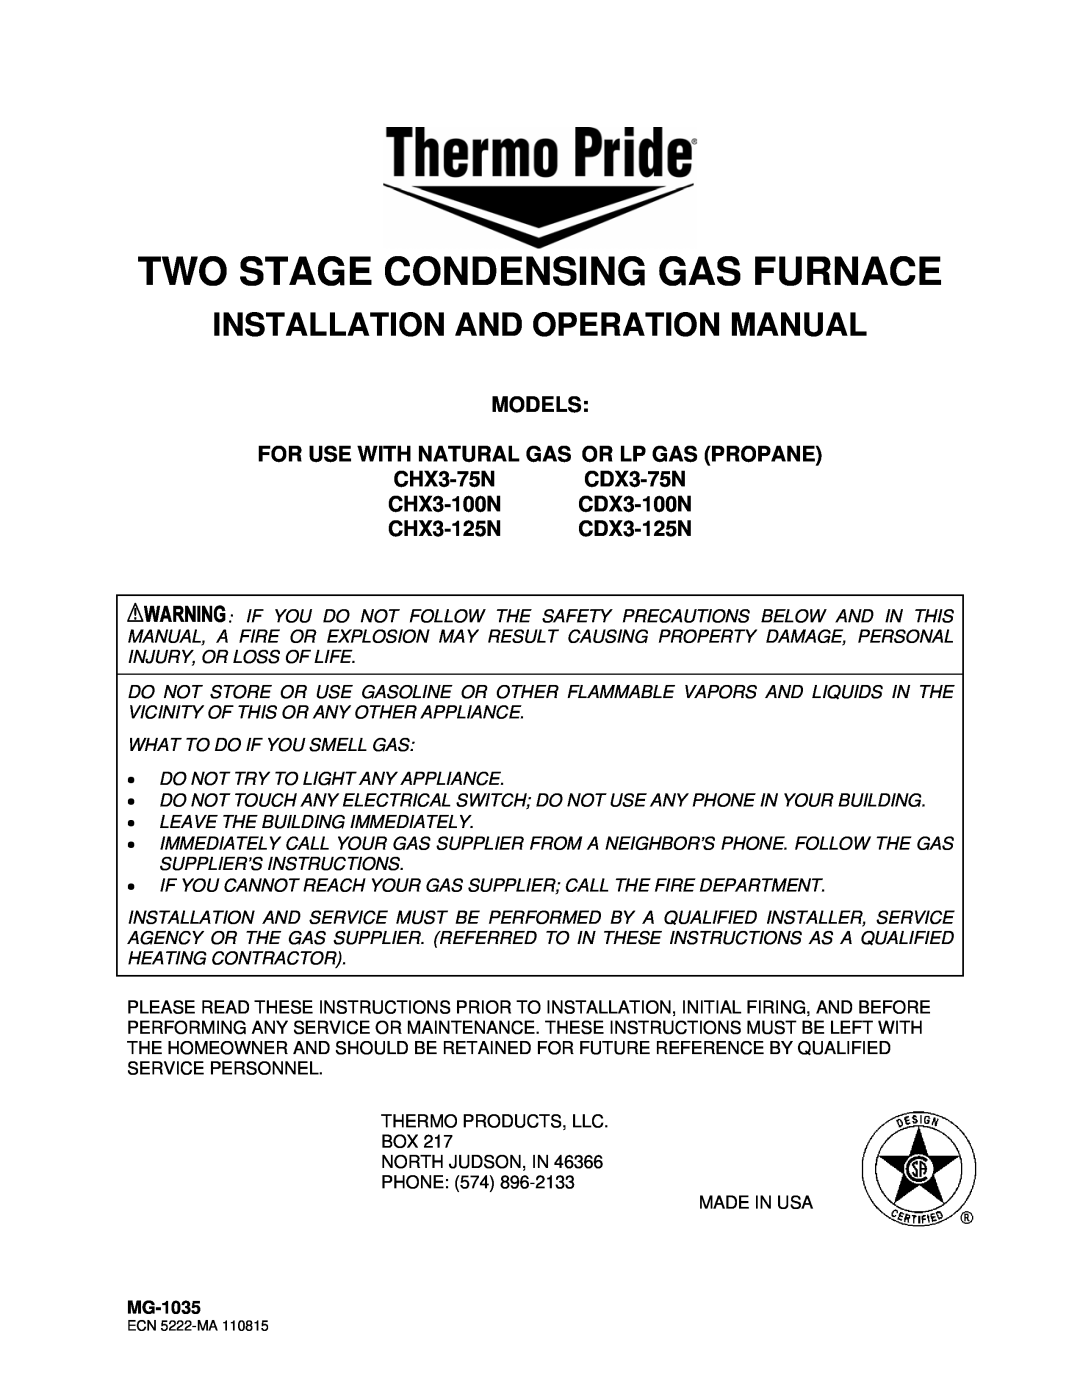 Thermo Products 100n, chx-3 75n operation manual Models For Use With Natural Gas Or Lp Gas Propane, CHX3-125N CDX3-125N 